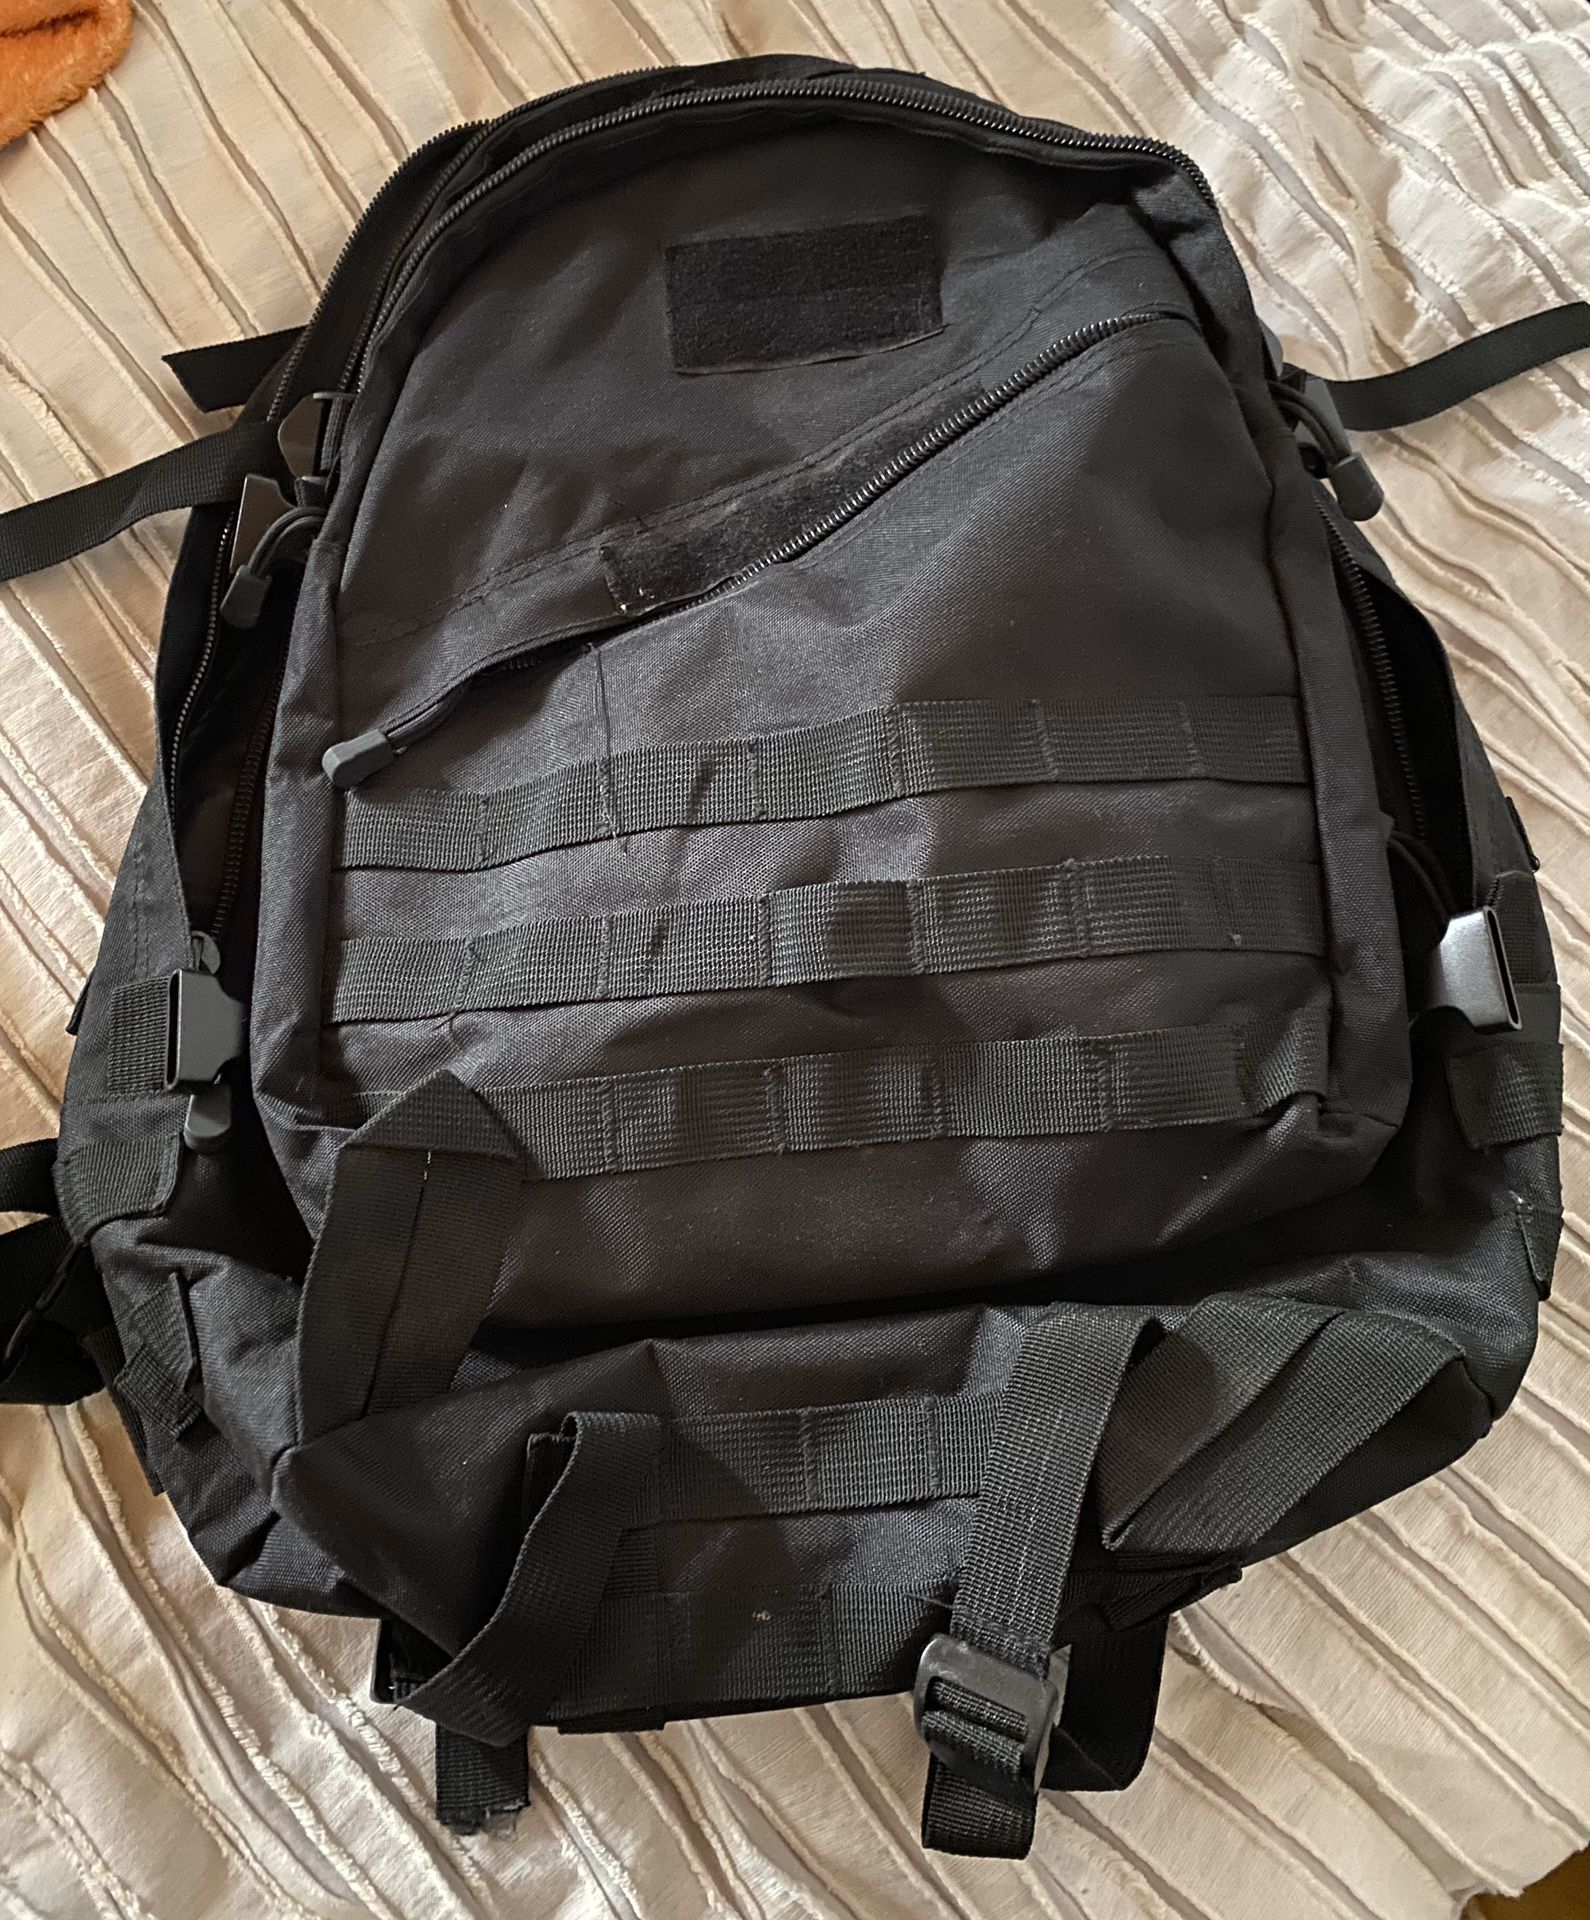 Good Used Condition Black Tactical Men’s Backpack Unisex